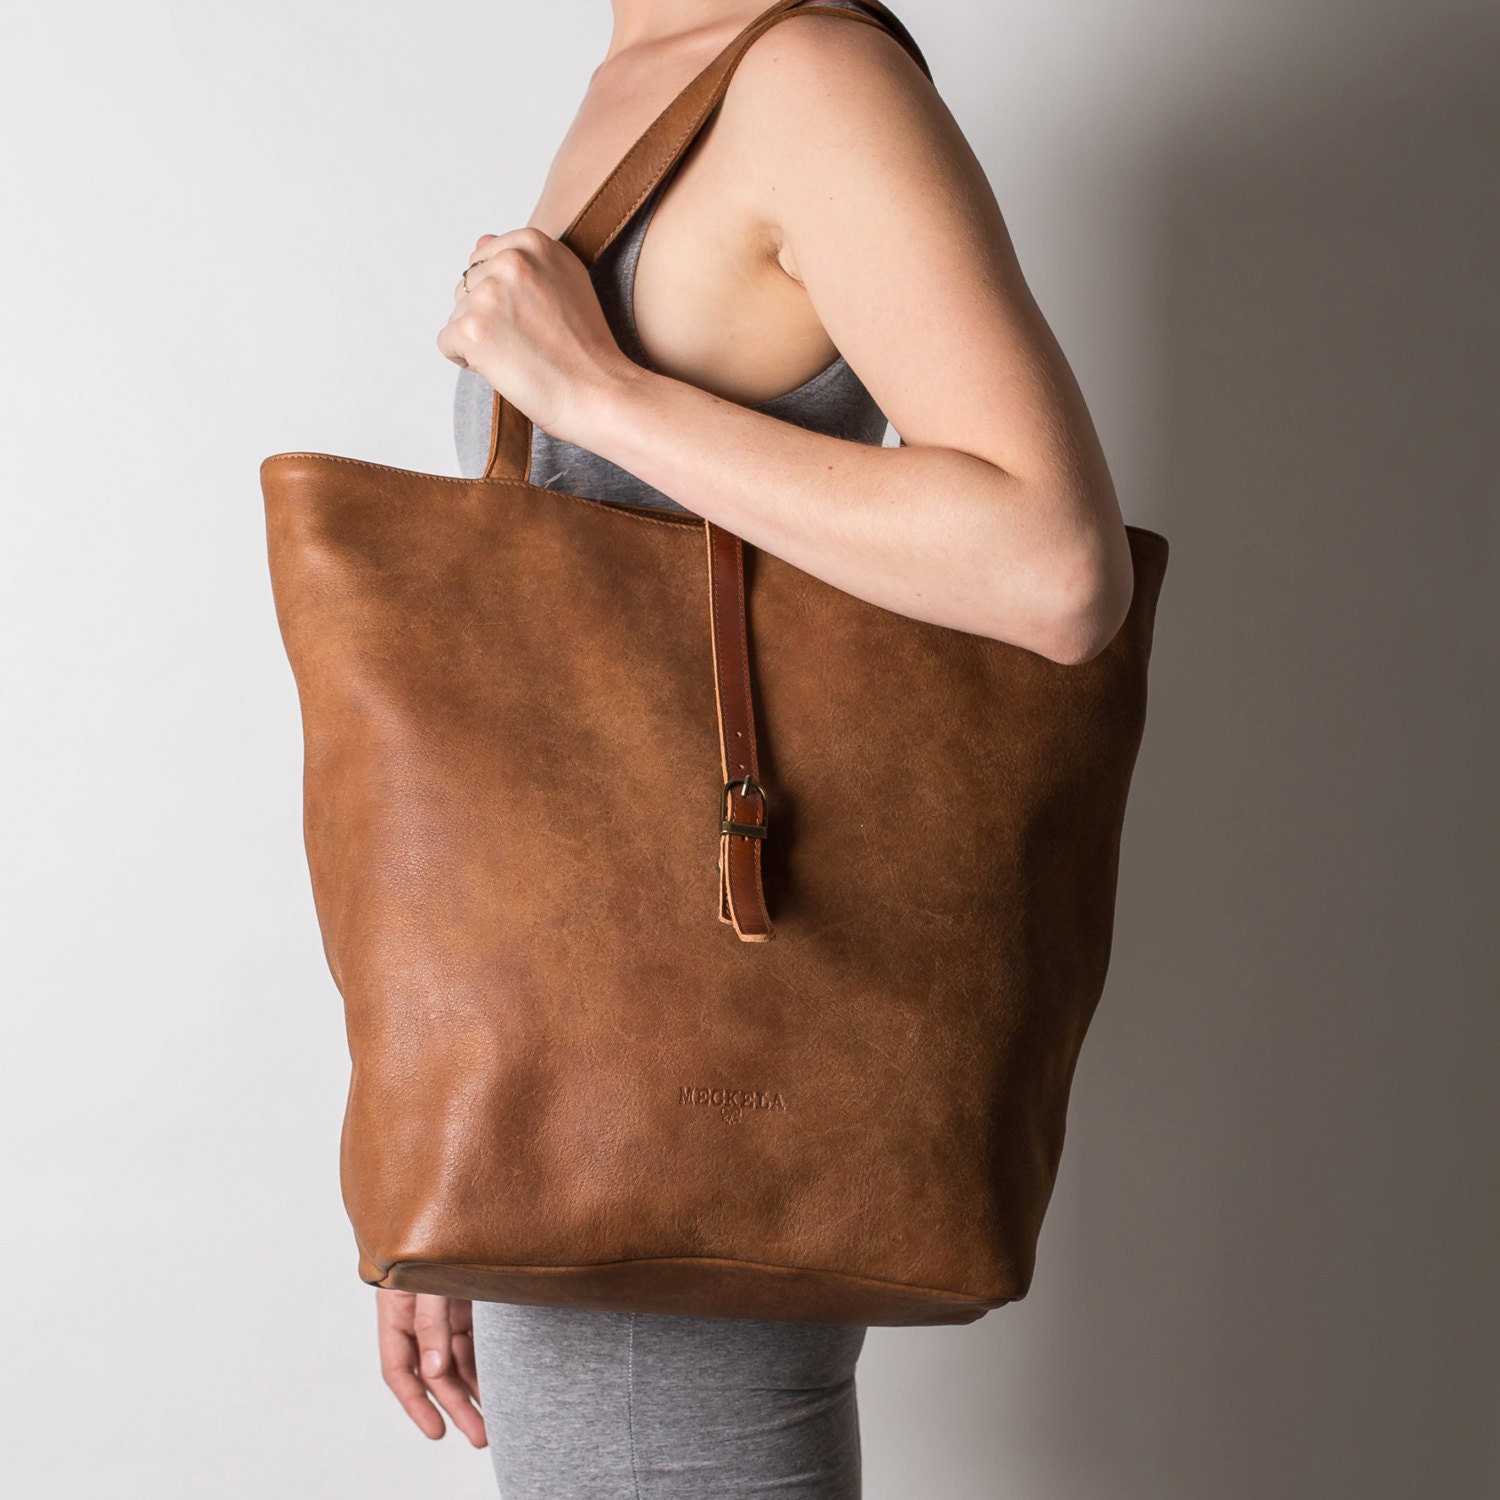 20% Sale Sale SaleSale Brown leather bag leather tote by Meckela